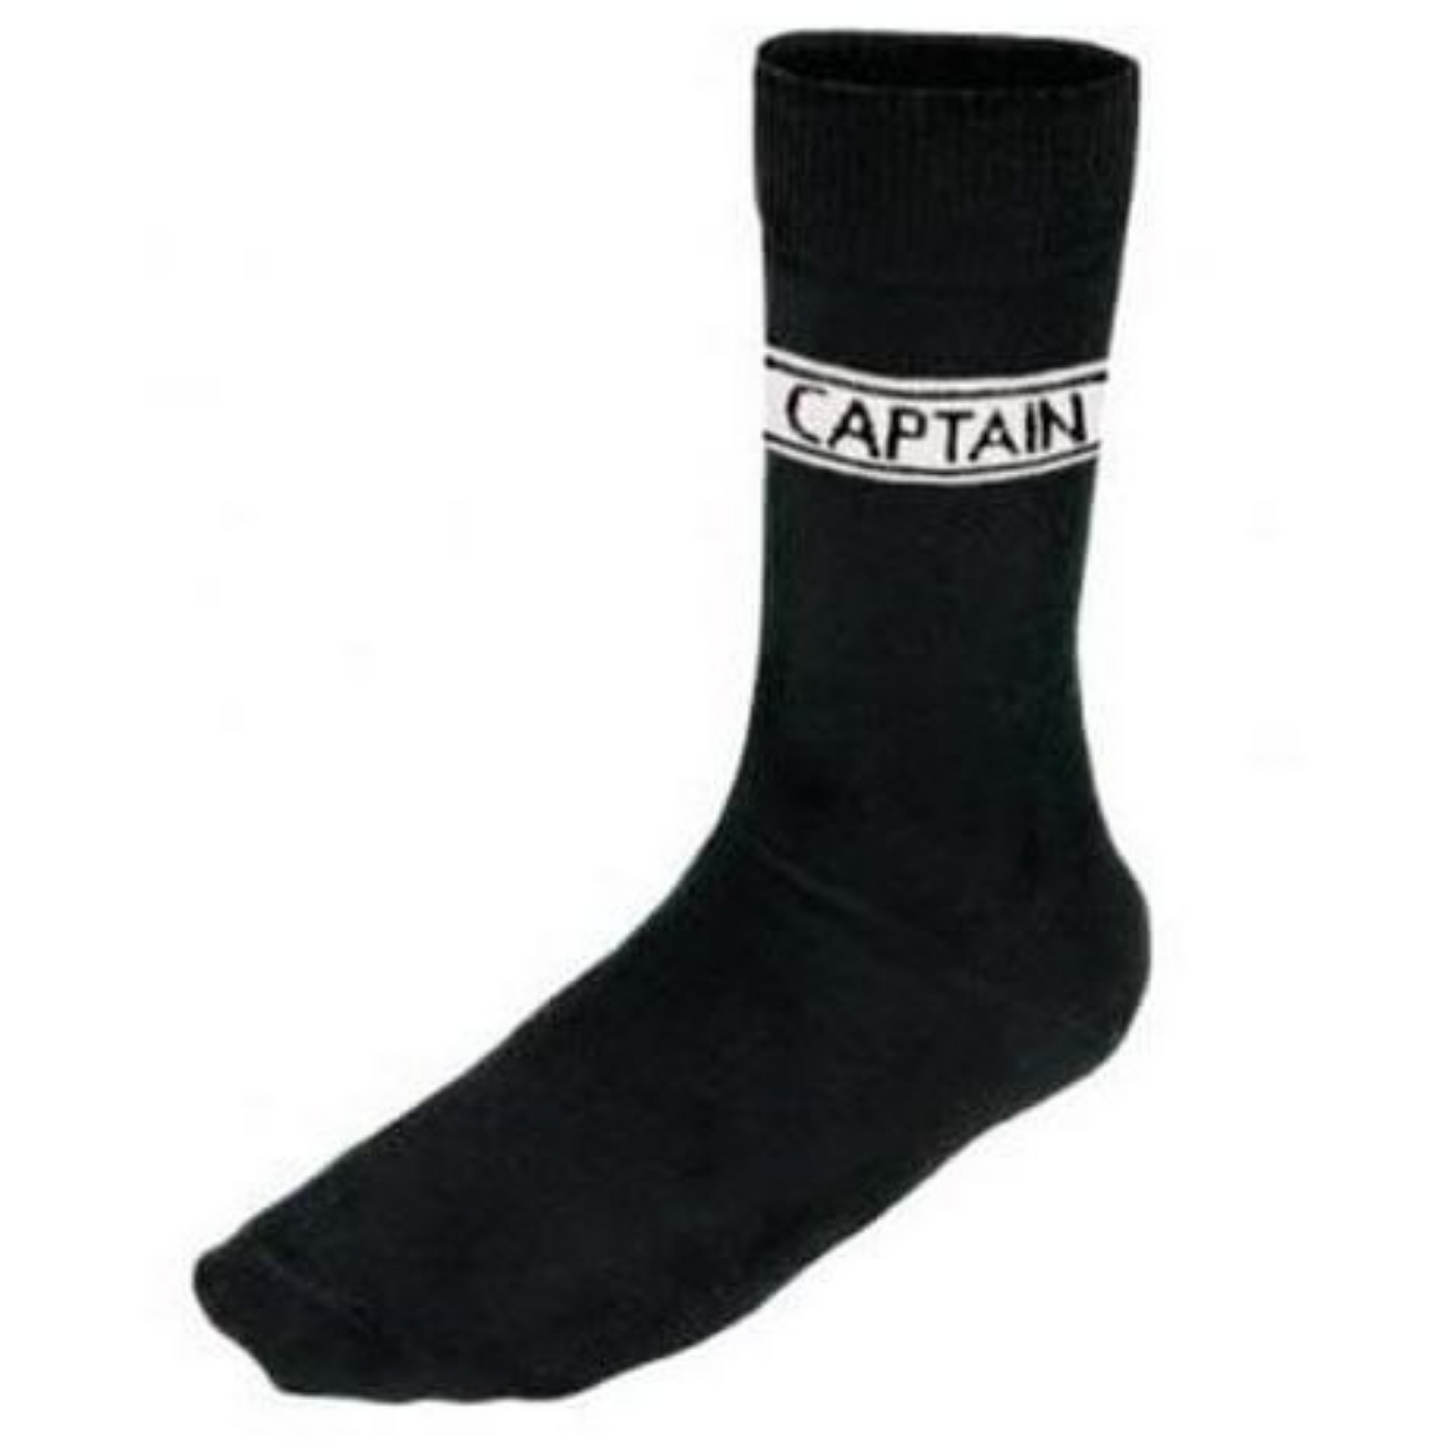 Nauticalia Captains Crew Socks Pack of 3 Pairs Gifts for Sailing and Nautical Enthusiasts